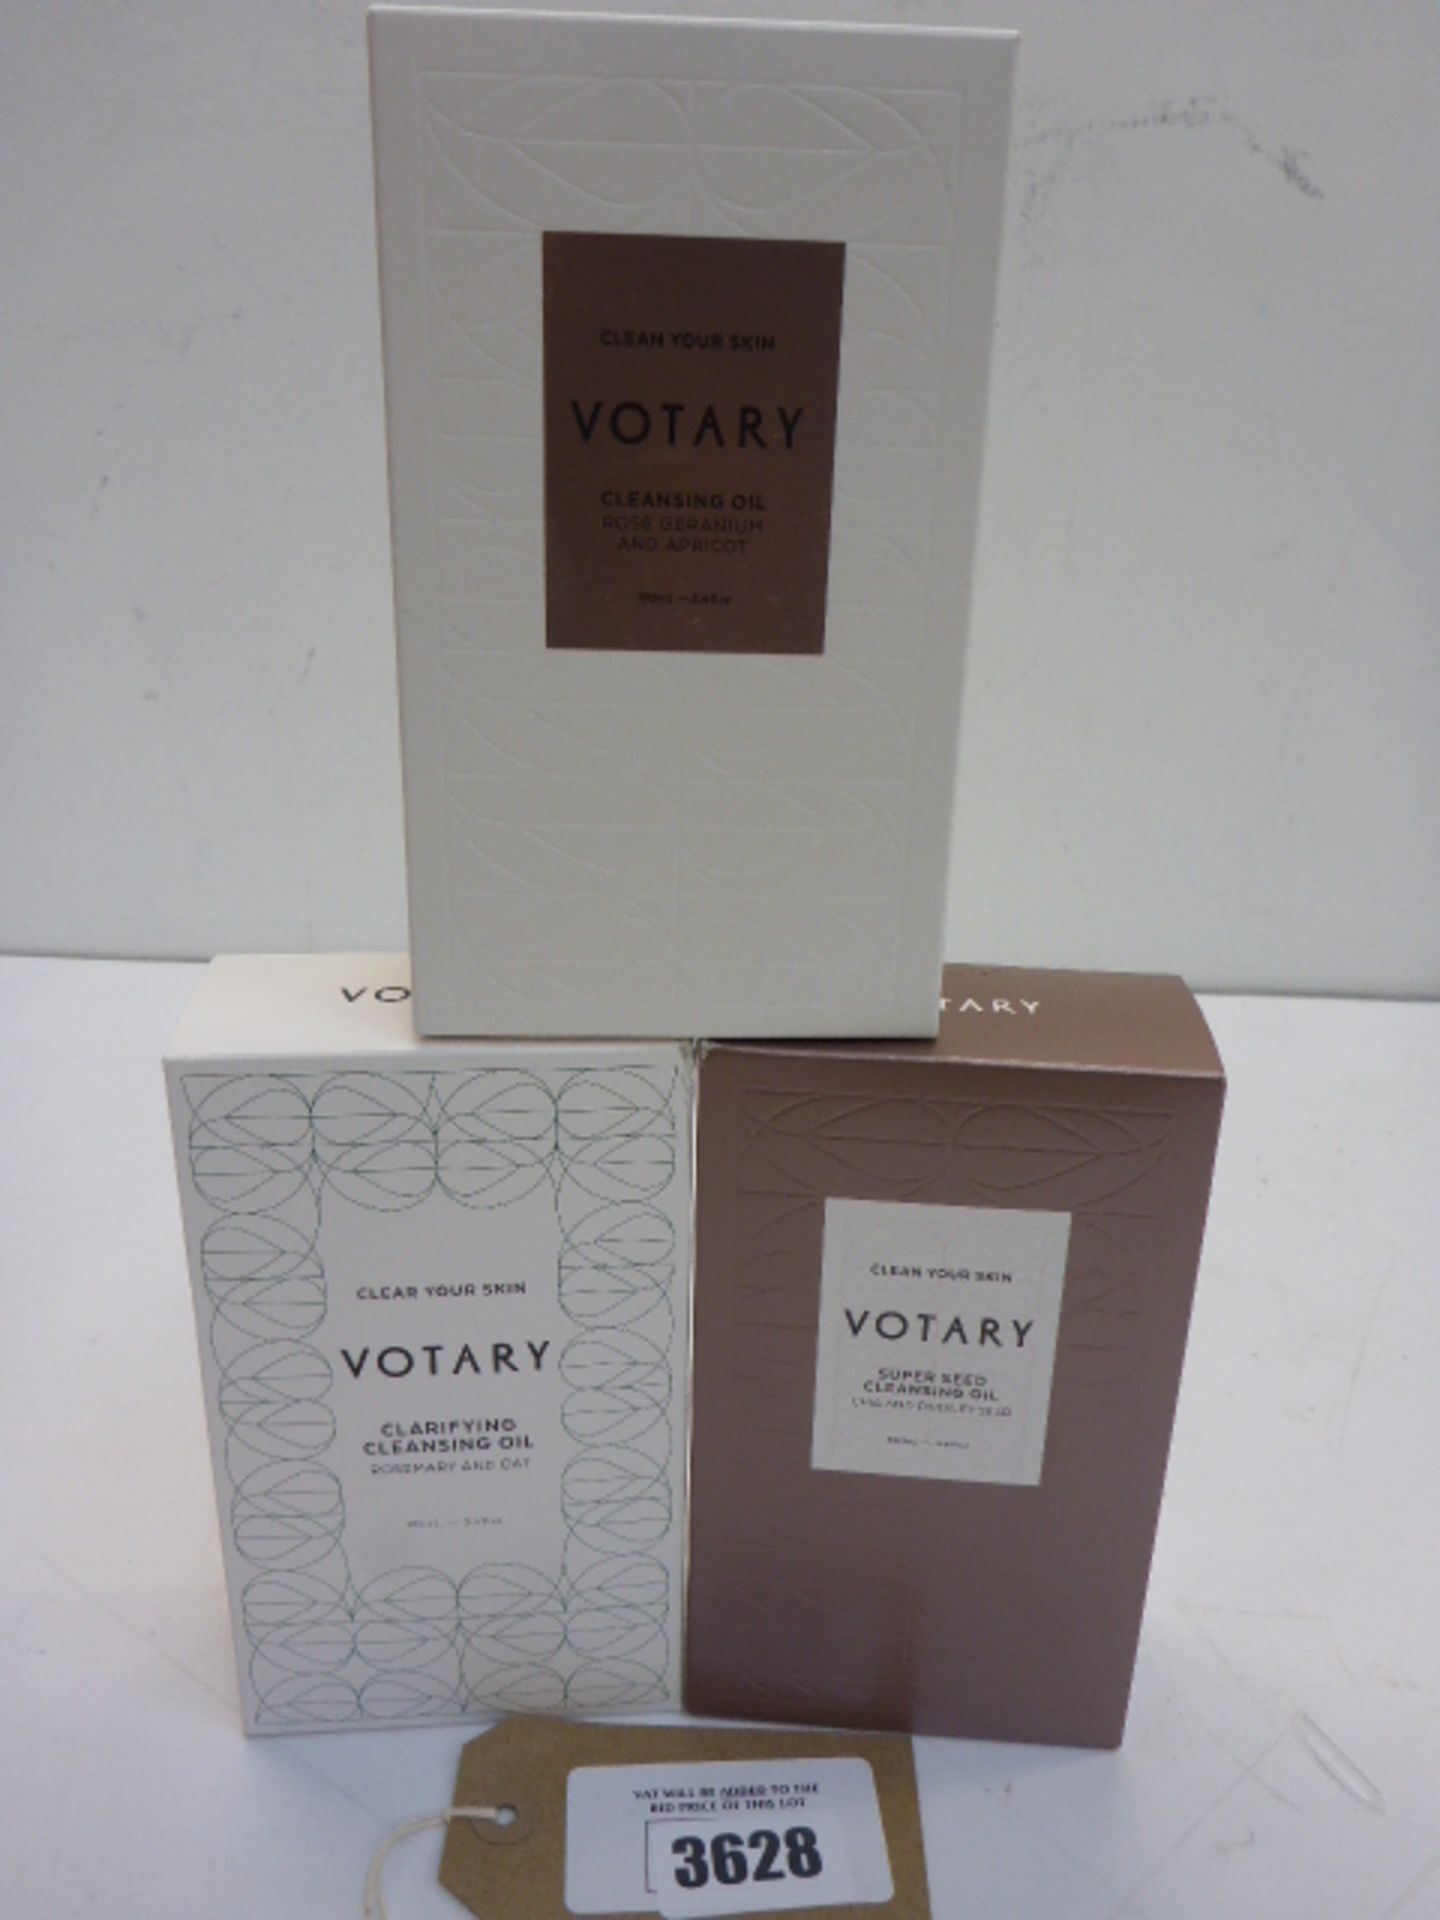 Votary super seed cleansing oil 100ml, Votary clarifying cleansing oil 100ml & Votary cleansing